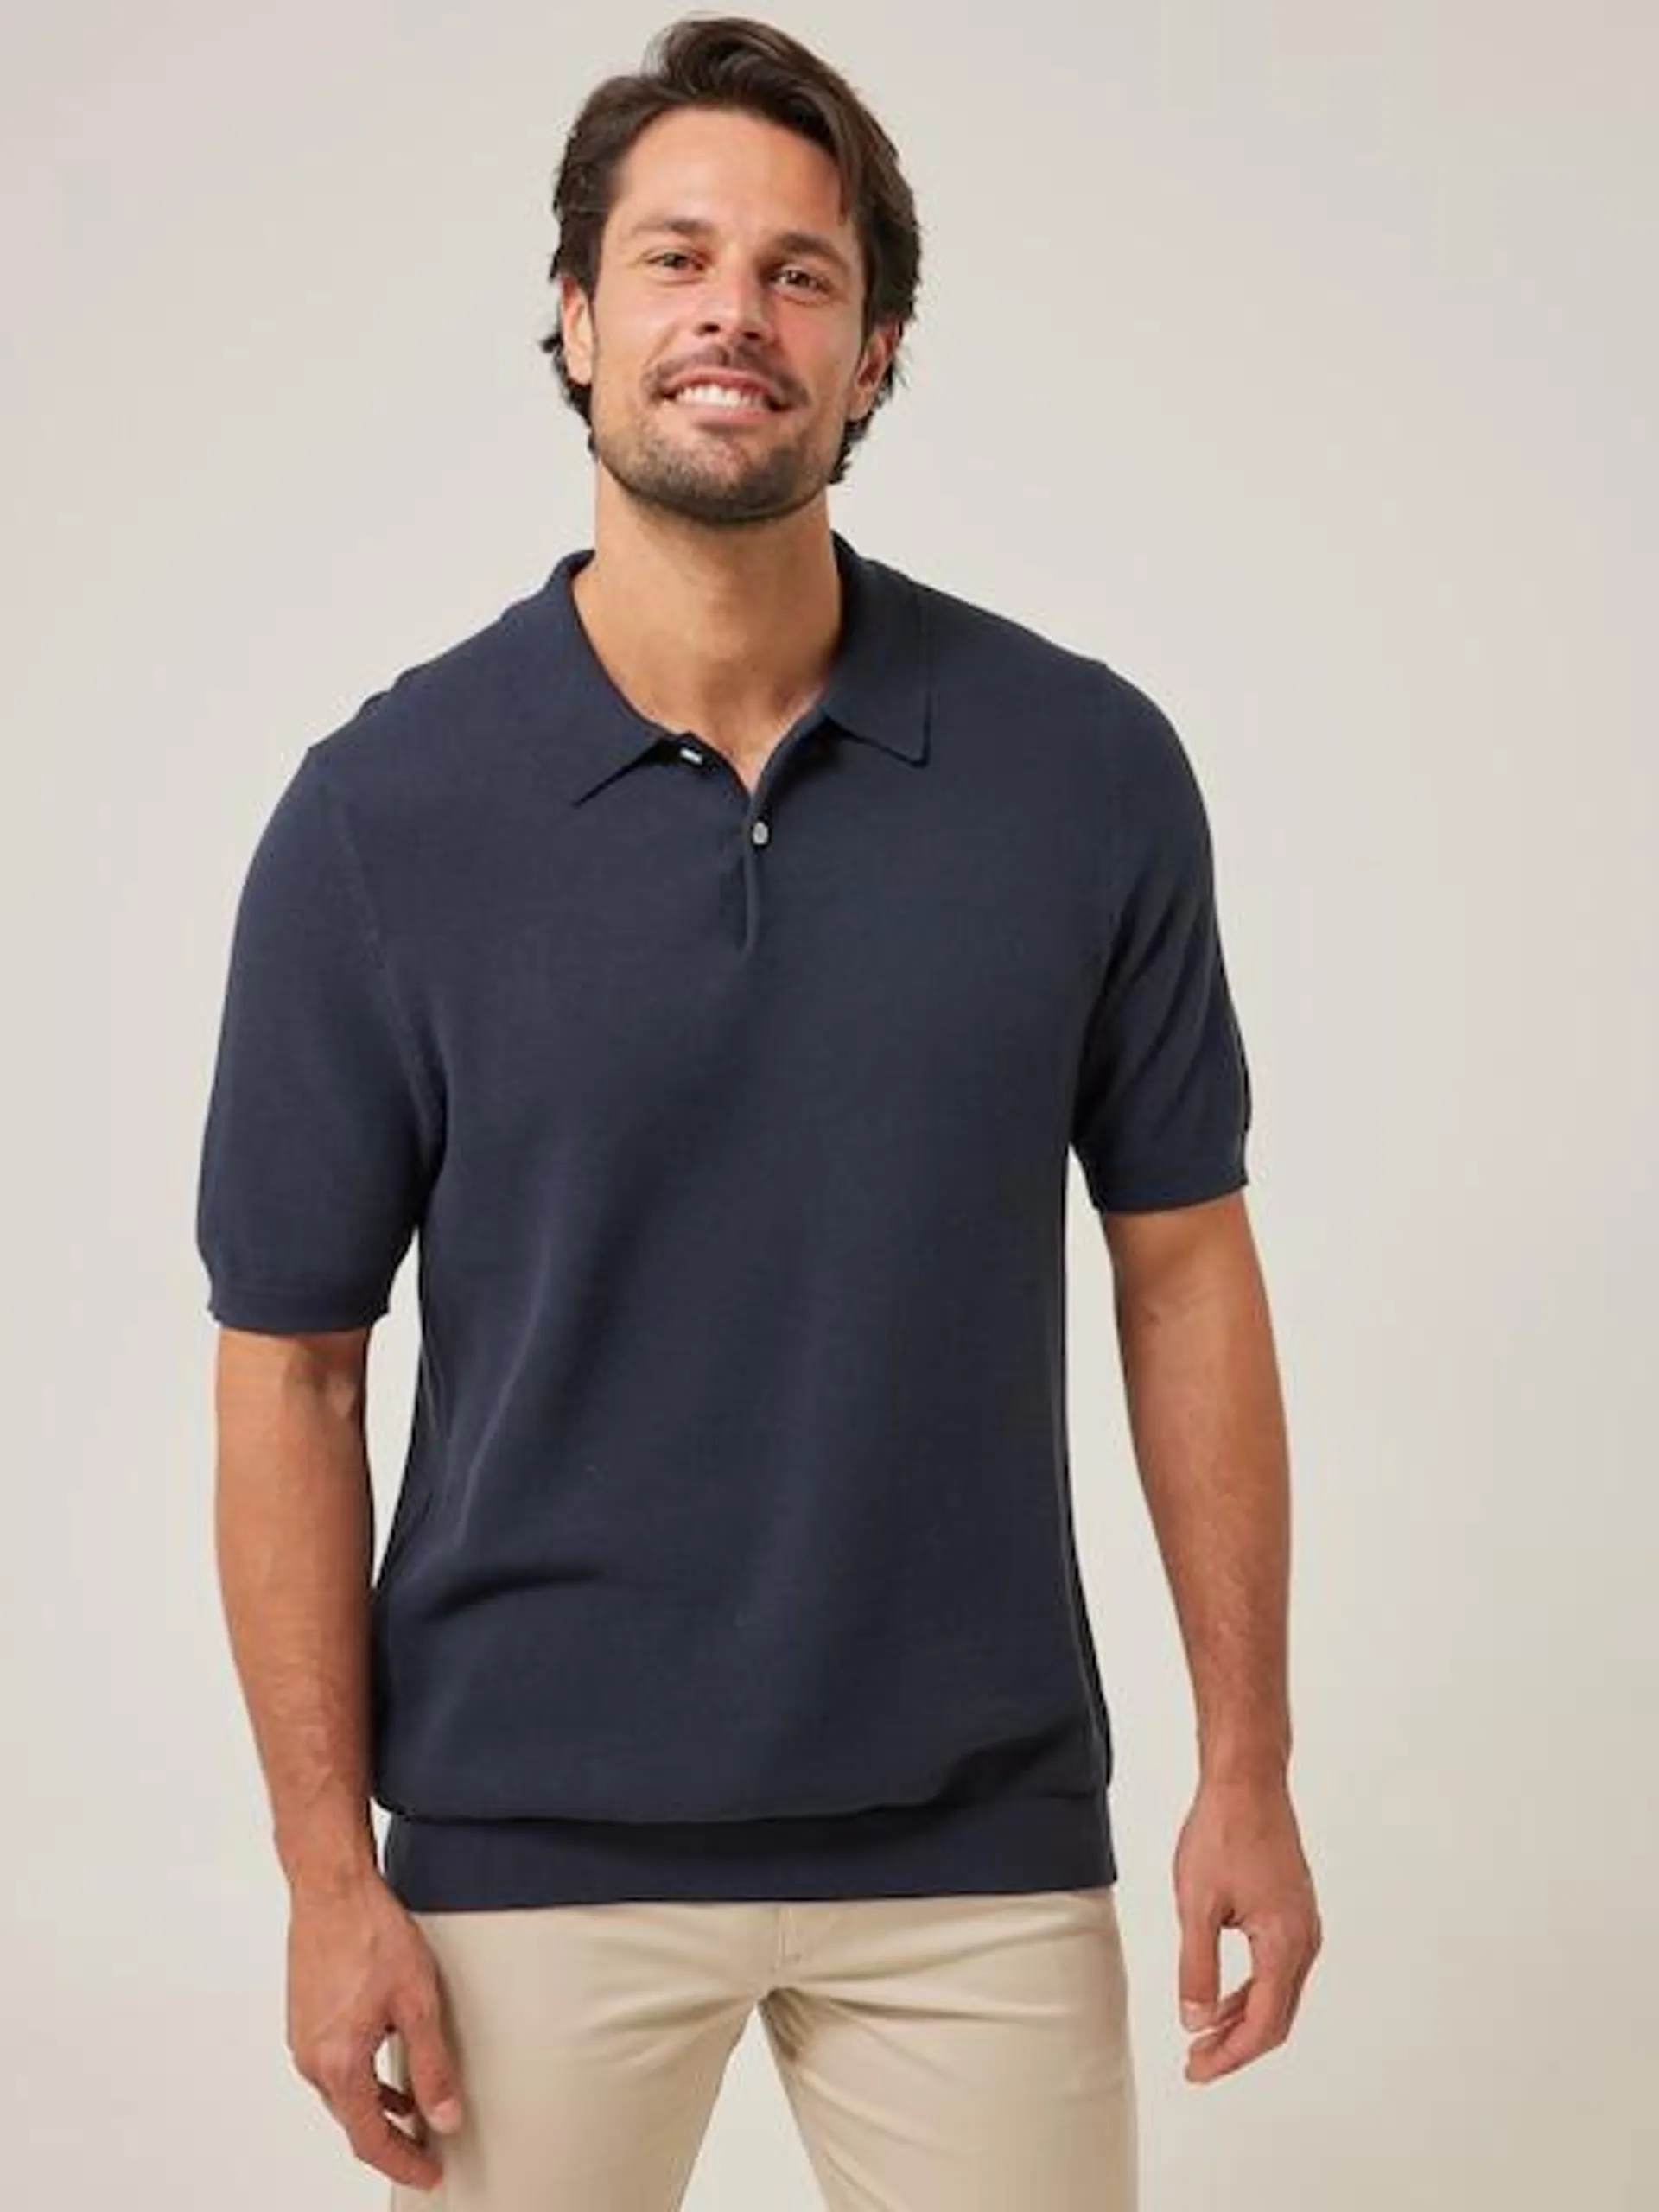 Just Jeans Knit Polo